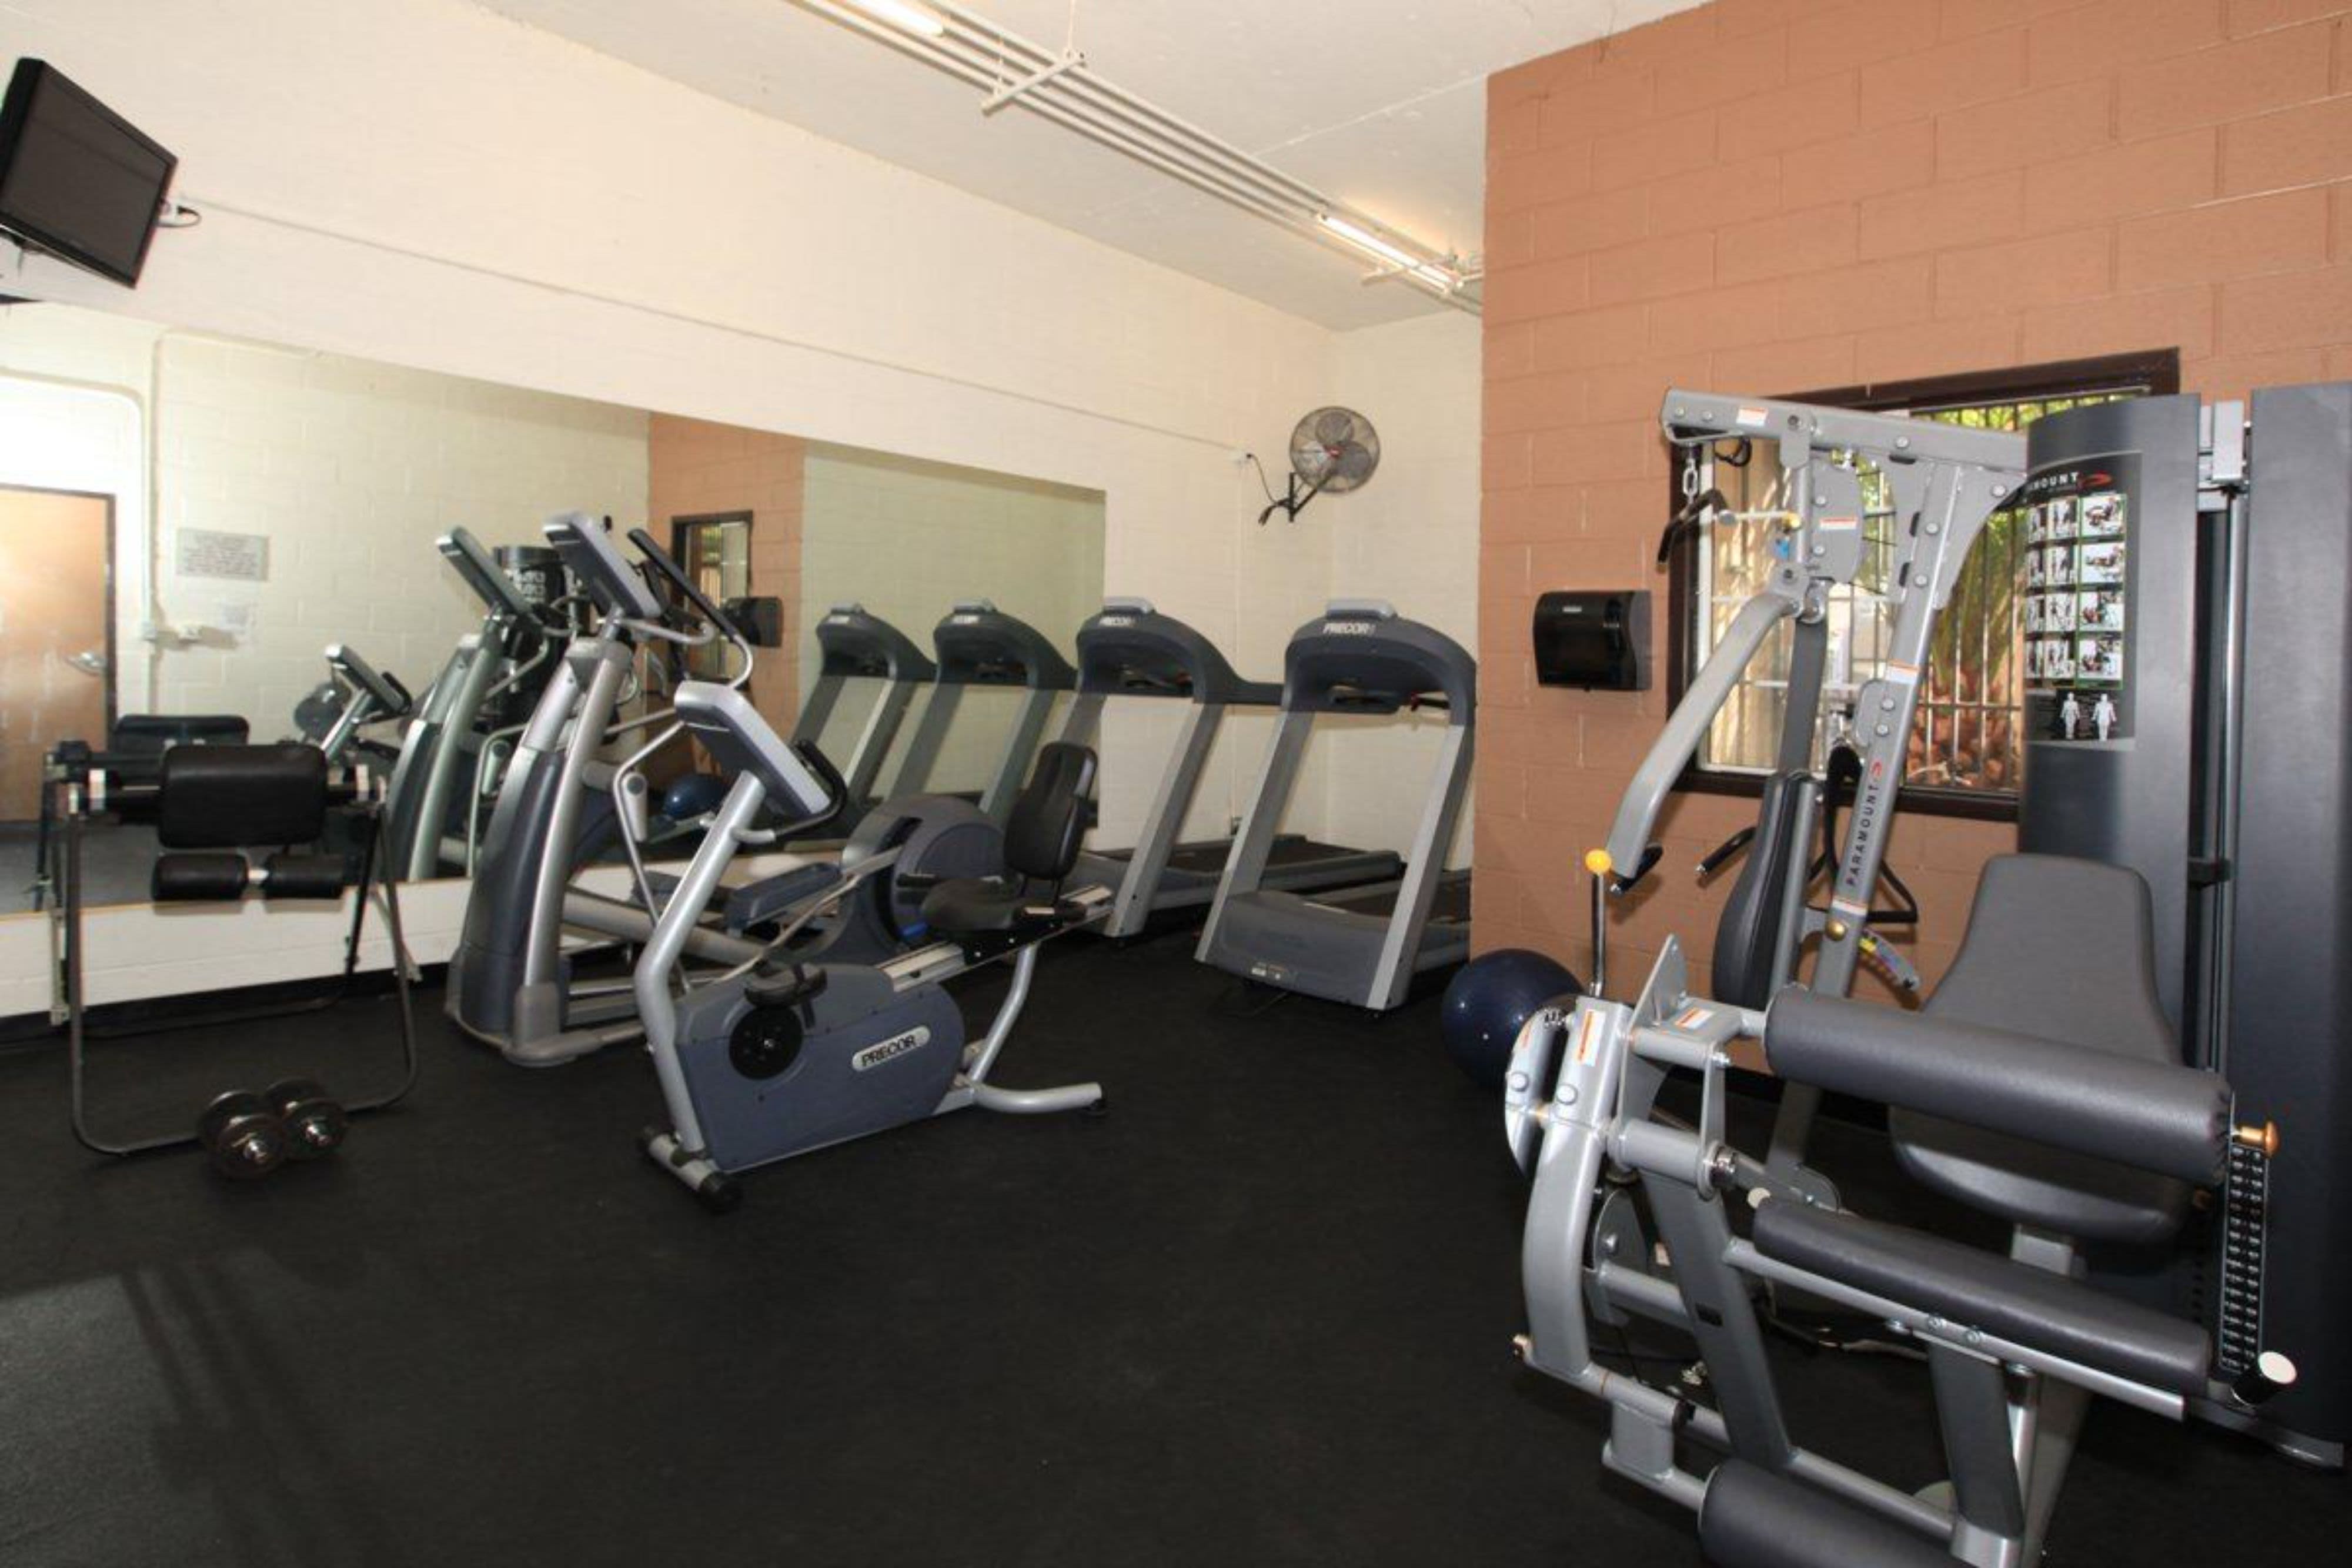 Fitness center at Savoy West Apartments in Los Angeles, California